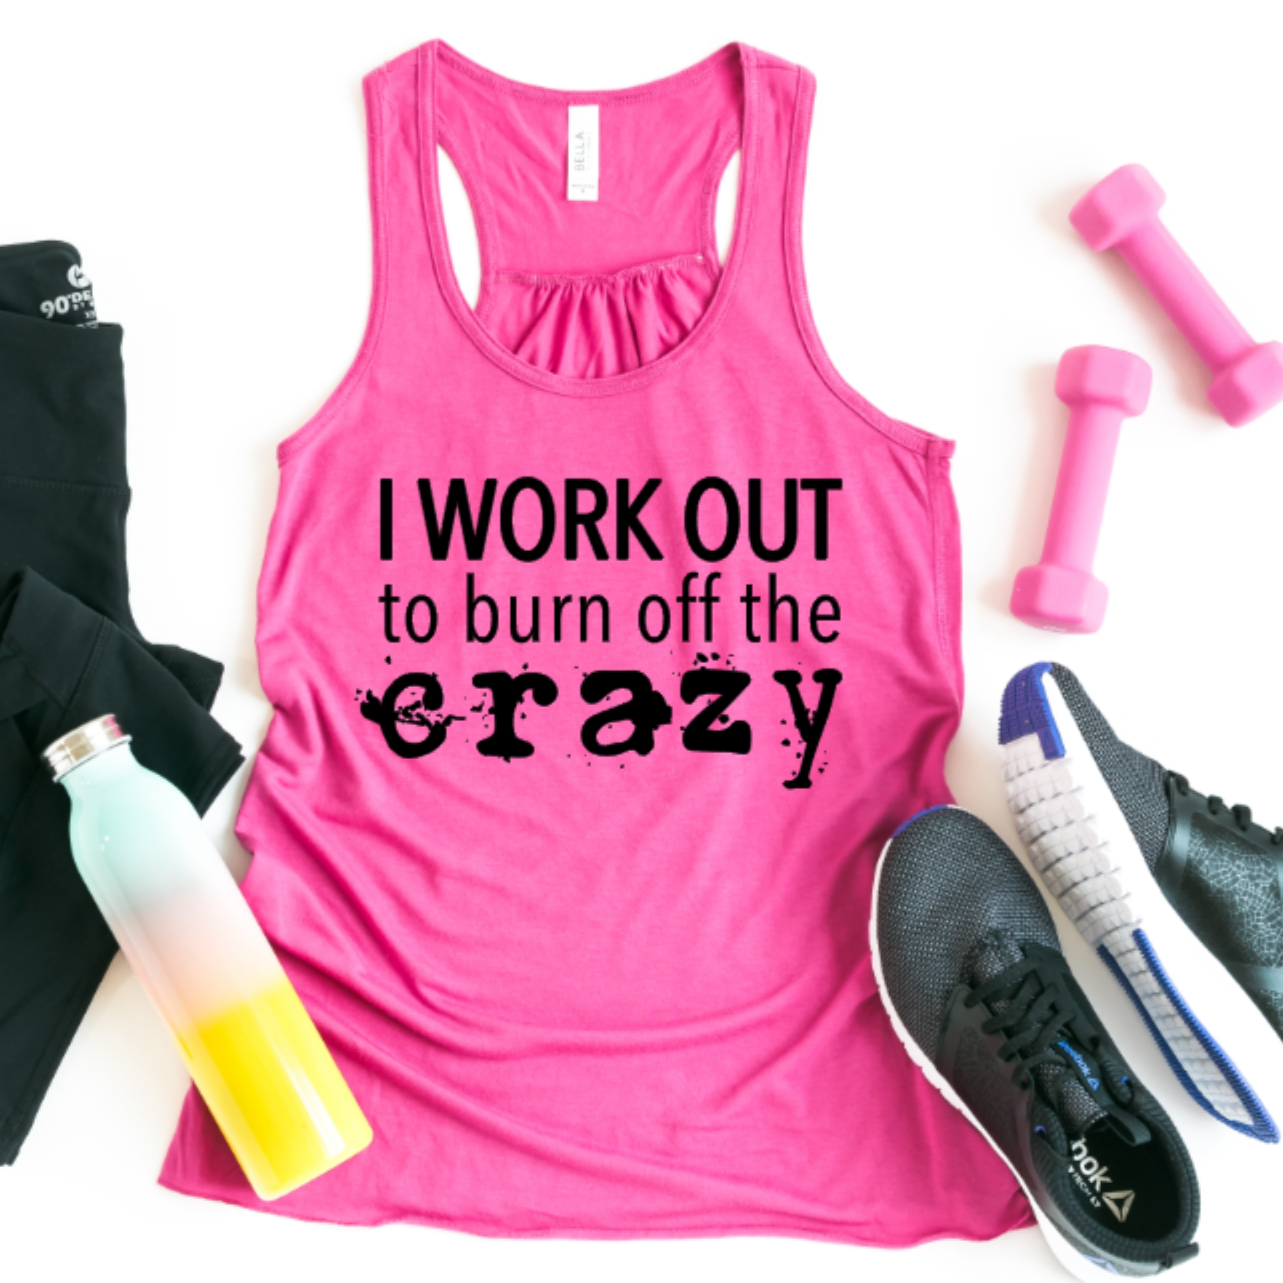 "I Work Out to Burn Off the Crazy" Flowy Racerback Tank [White or Black Design]